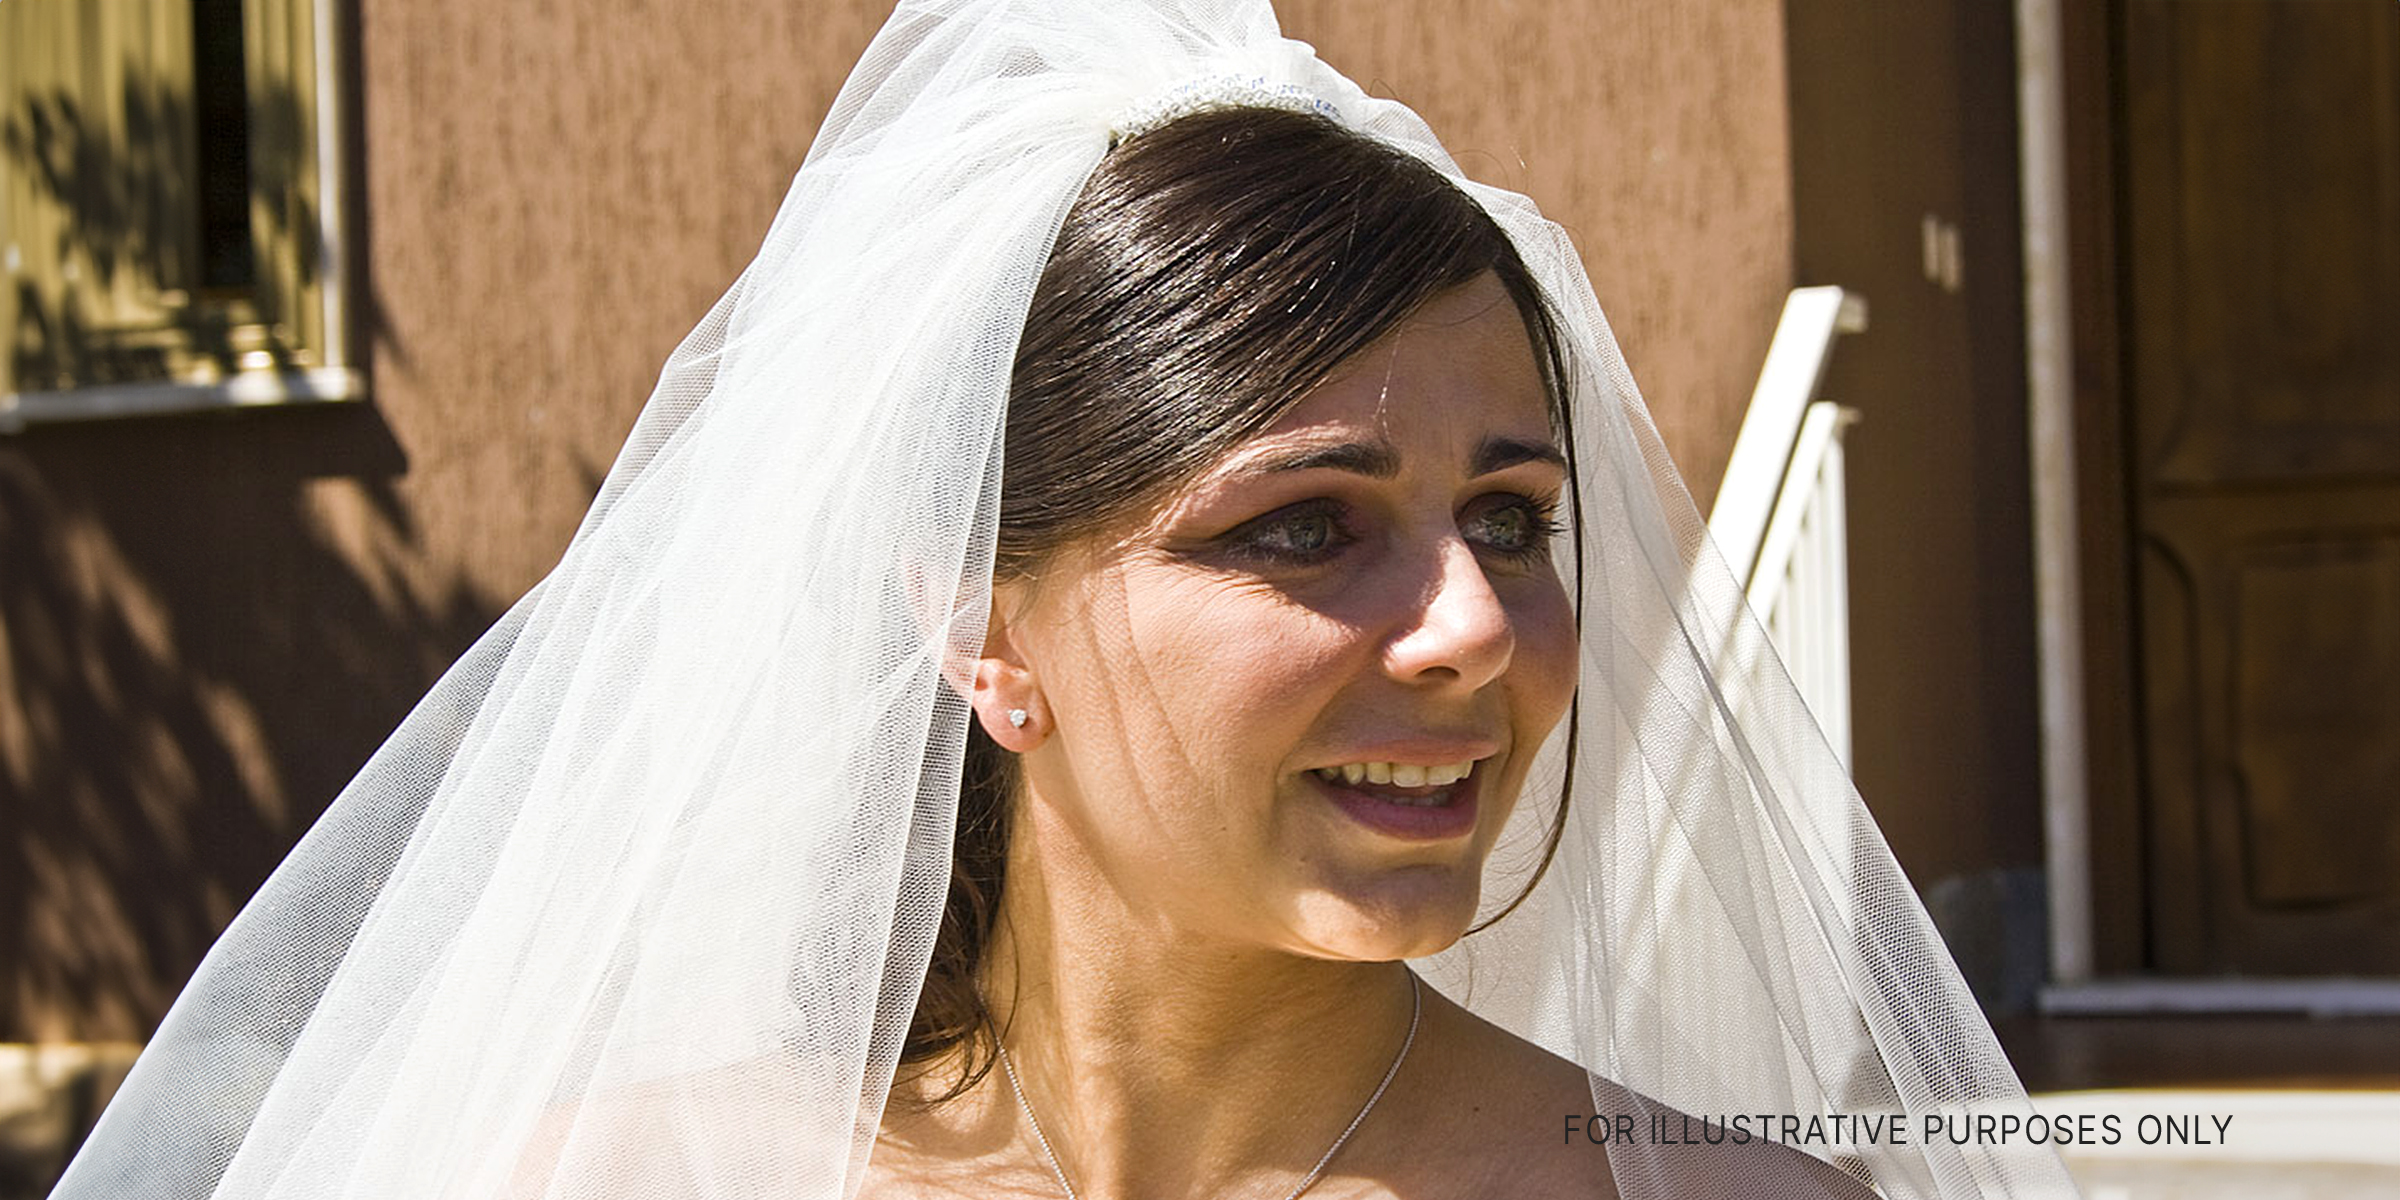 A bride on her wedding day | Source: Shutterstock